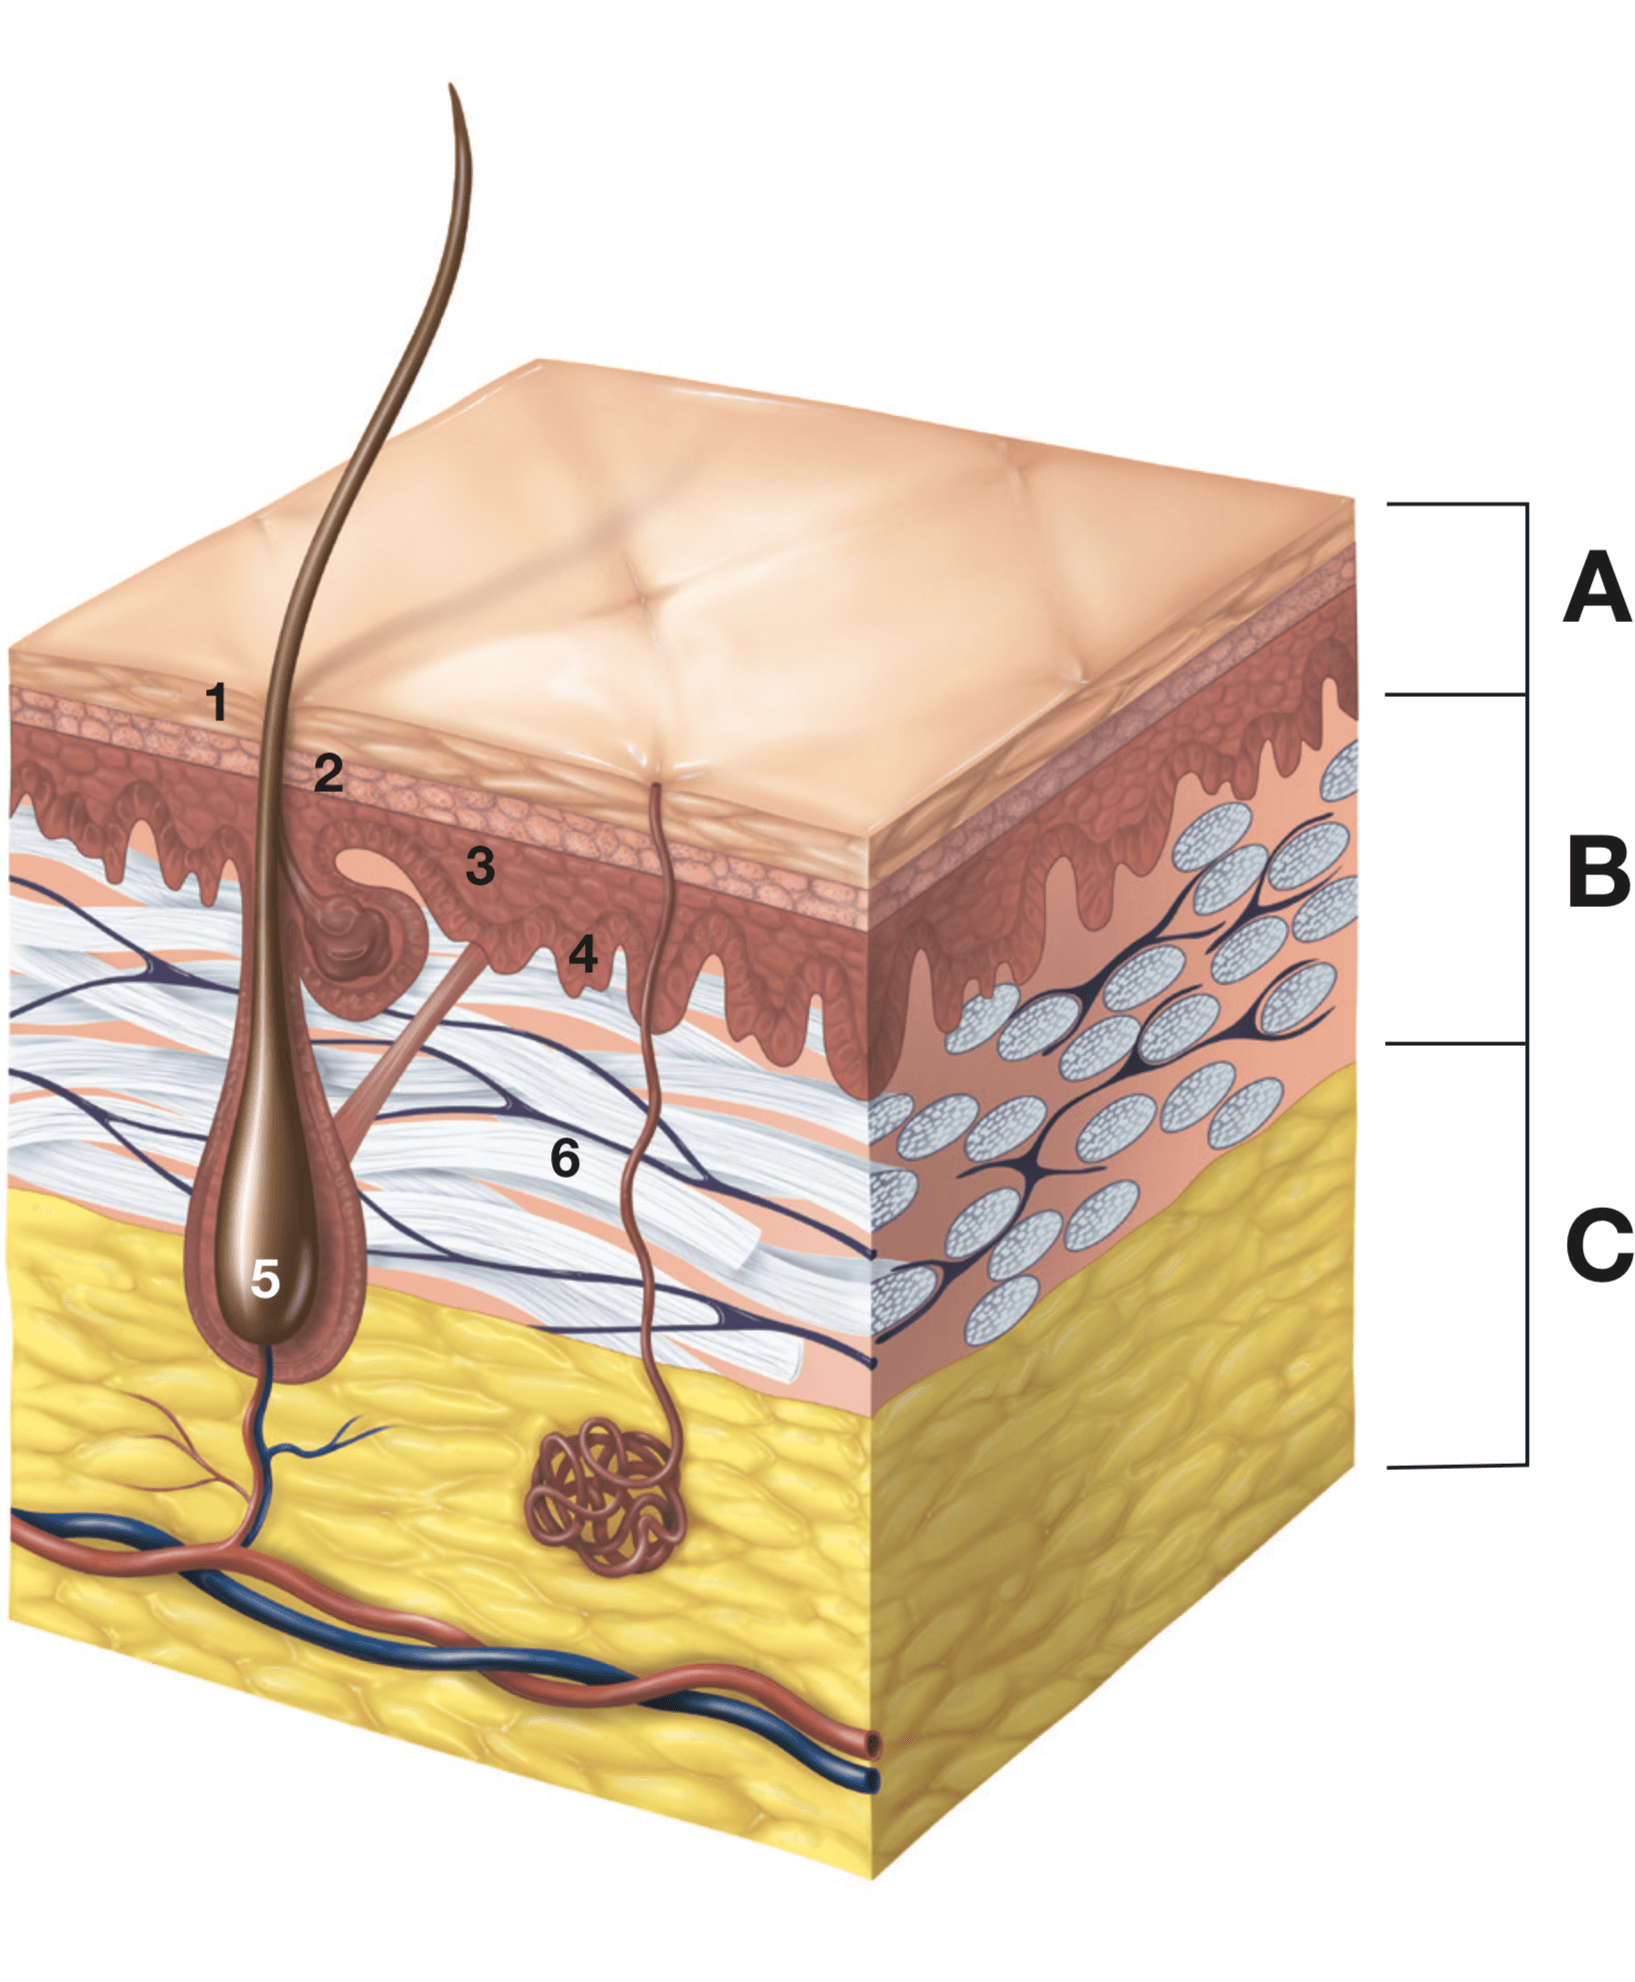 illustration of younger skin layers